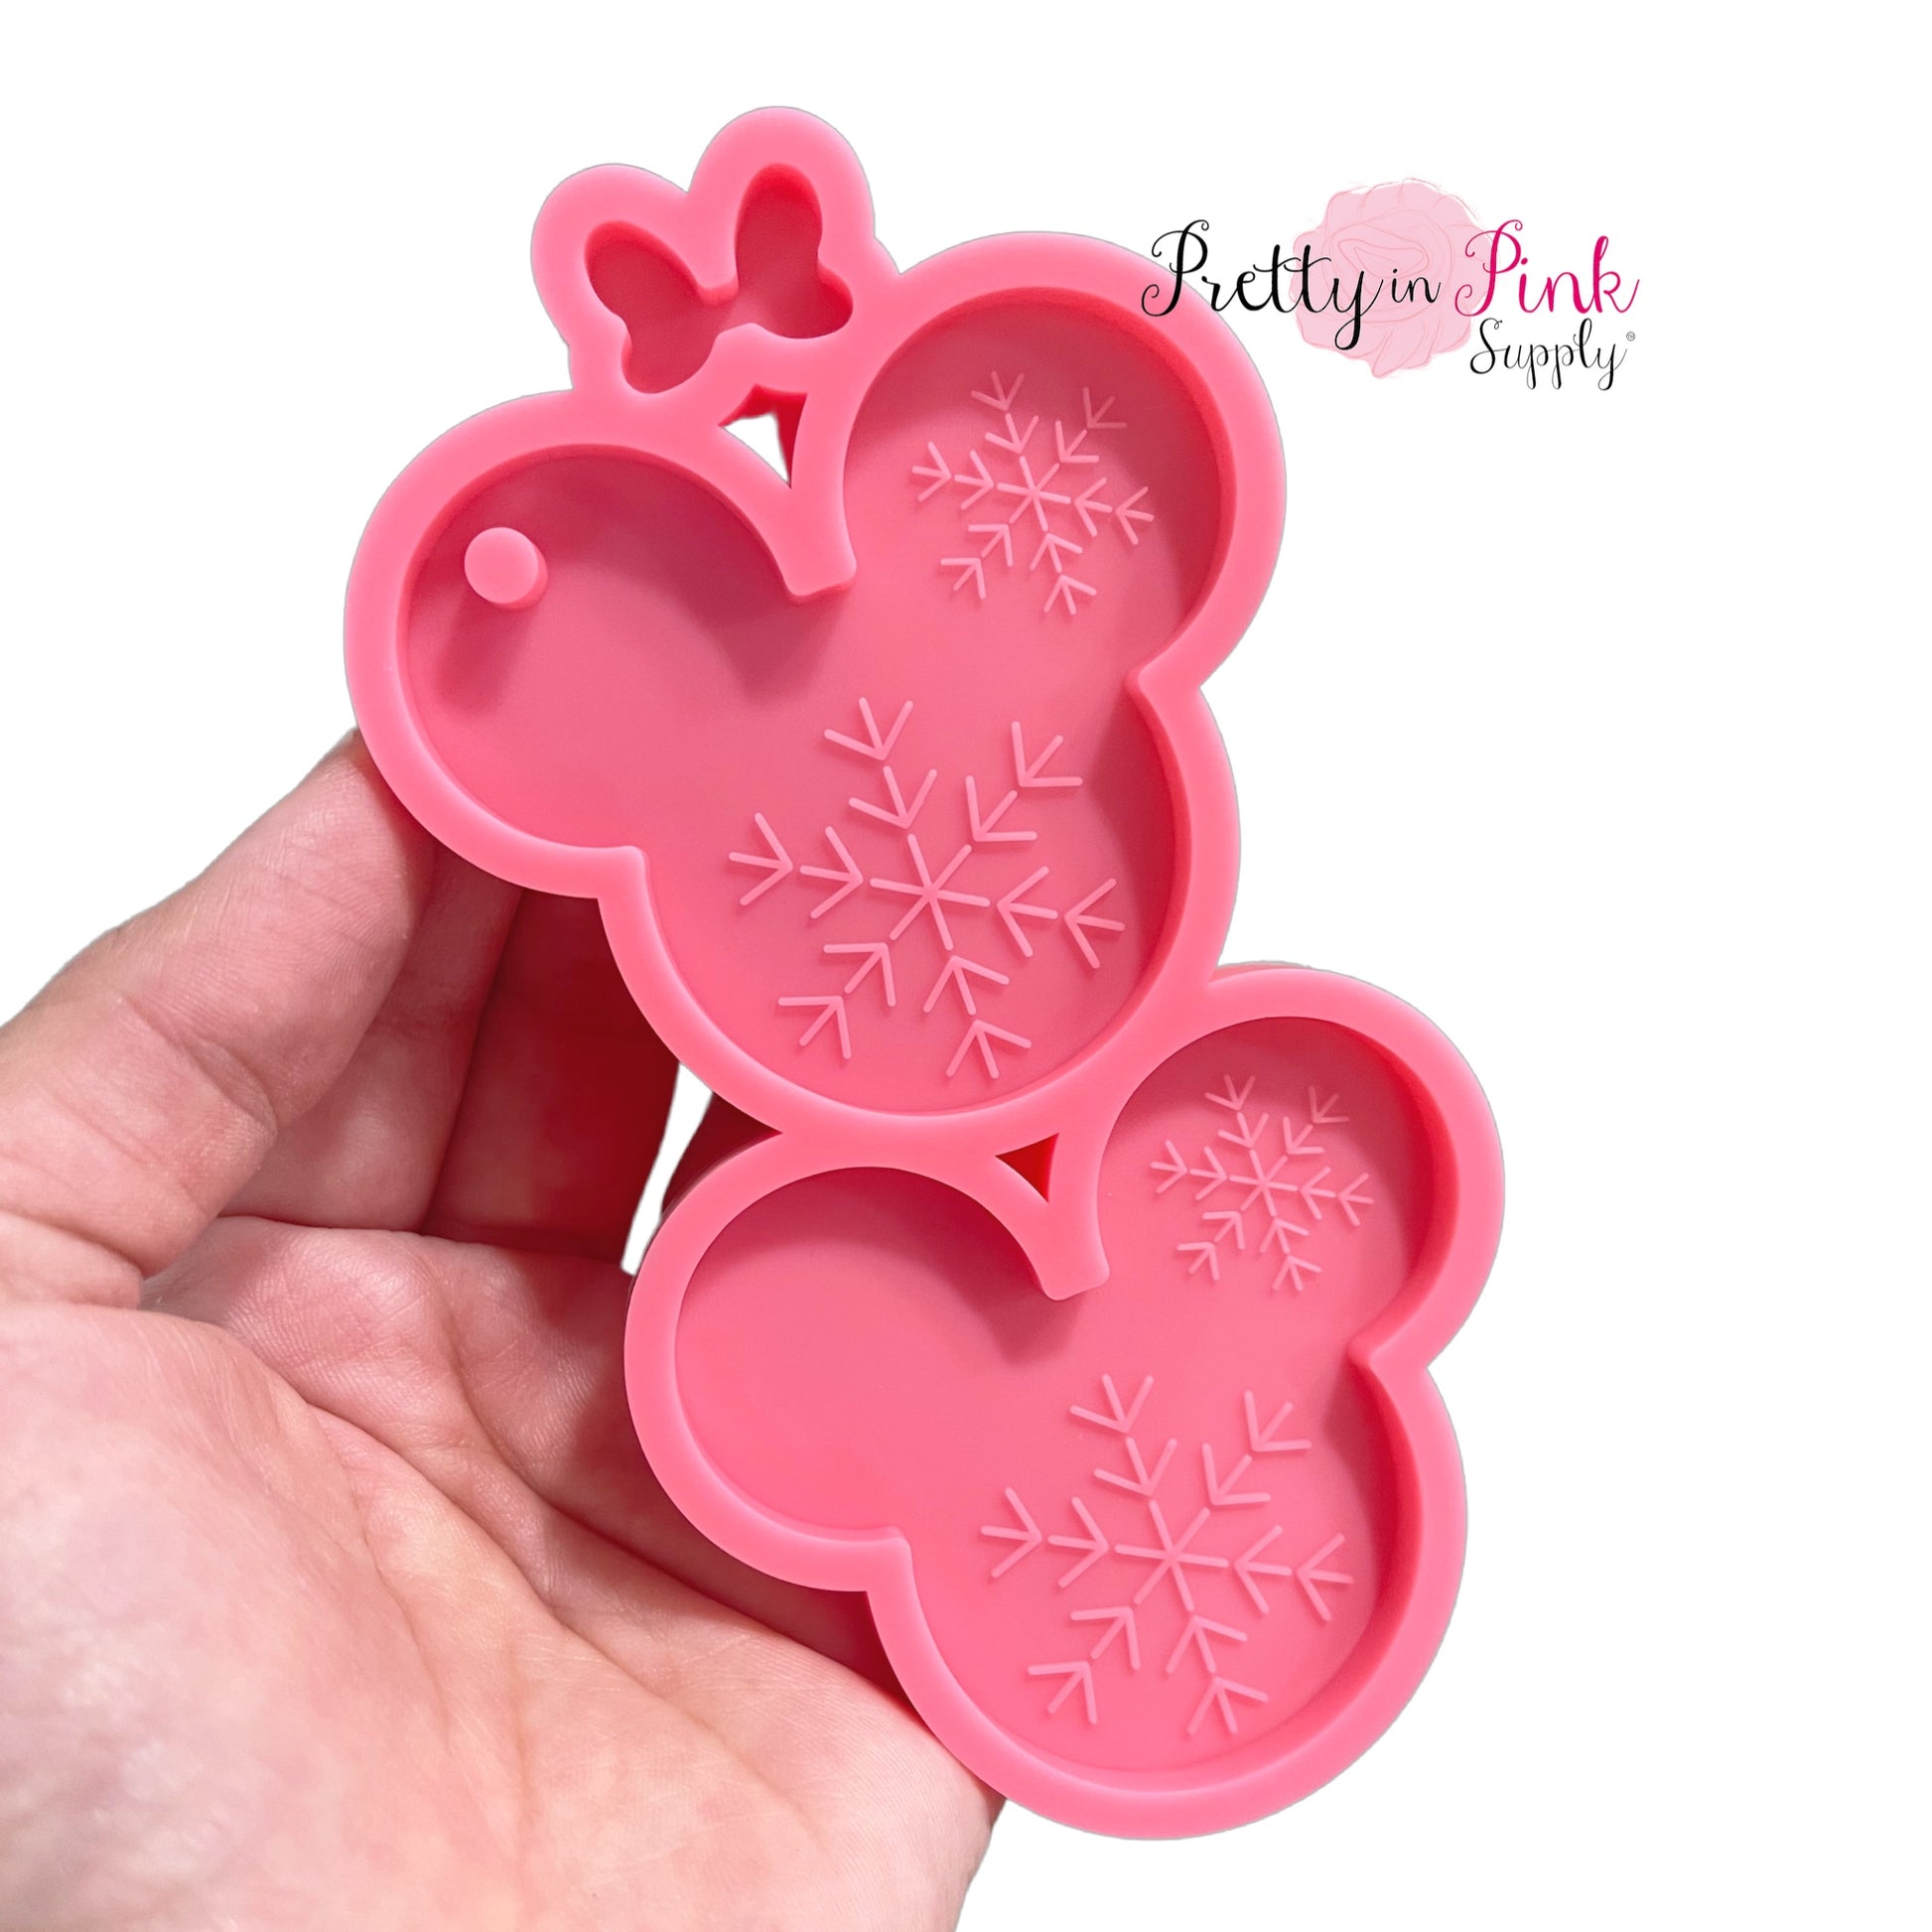 AB resin pink silicone mold of mouse ears with snowflakes and bow.